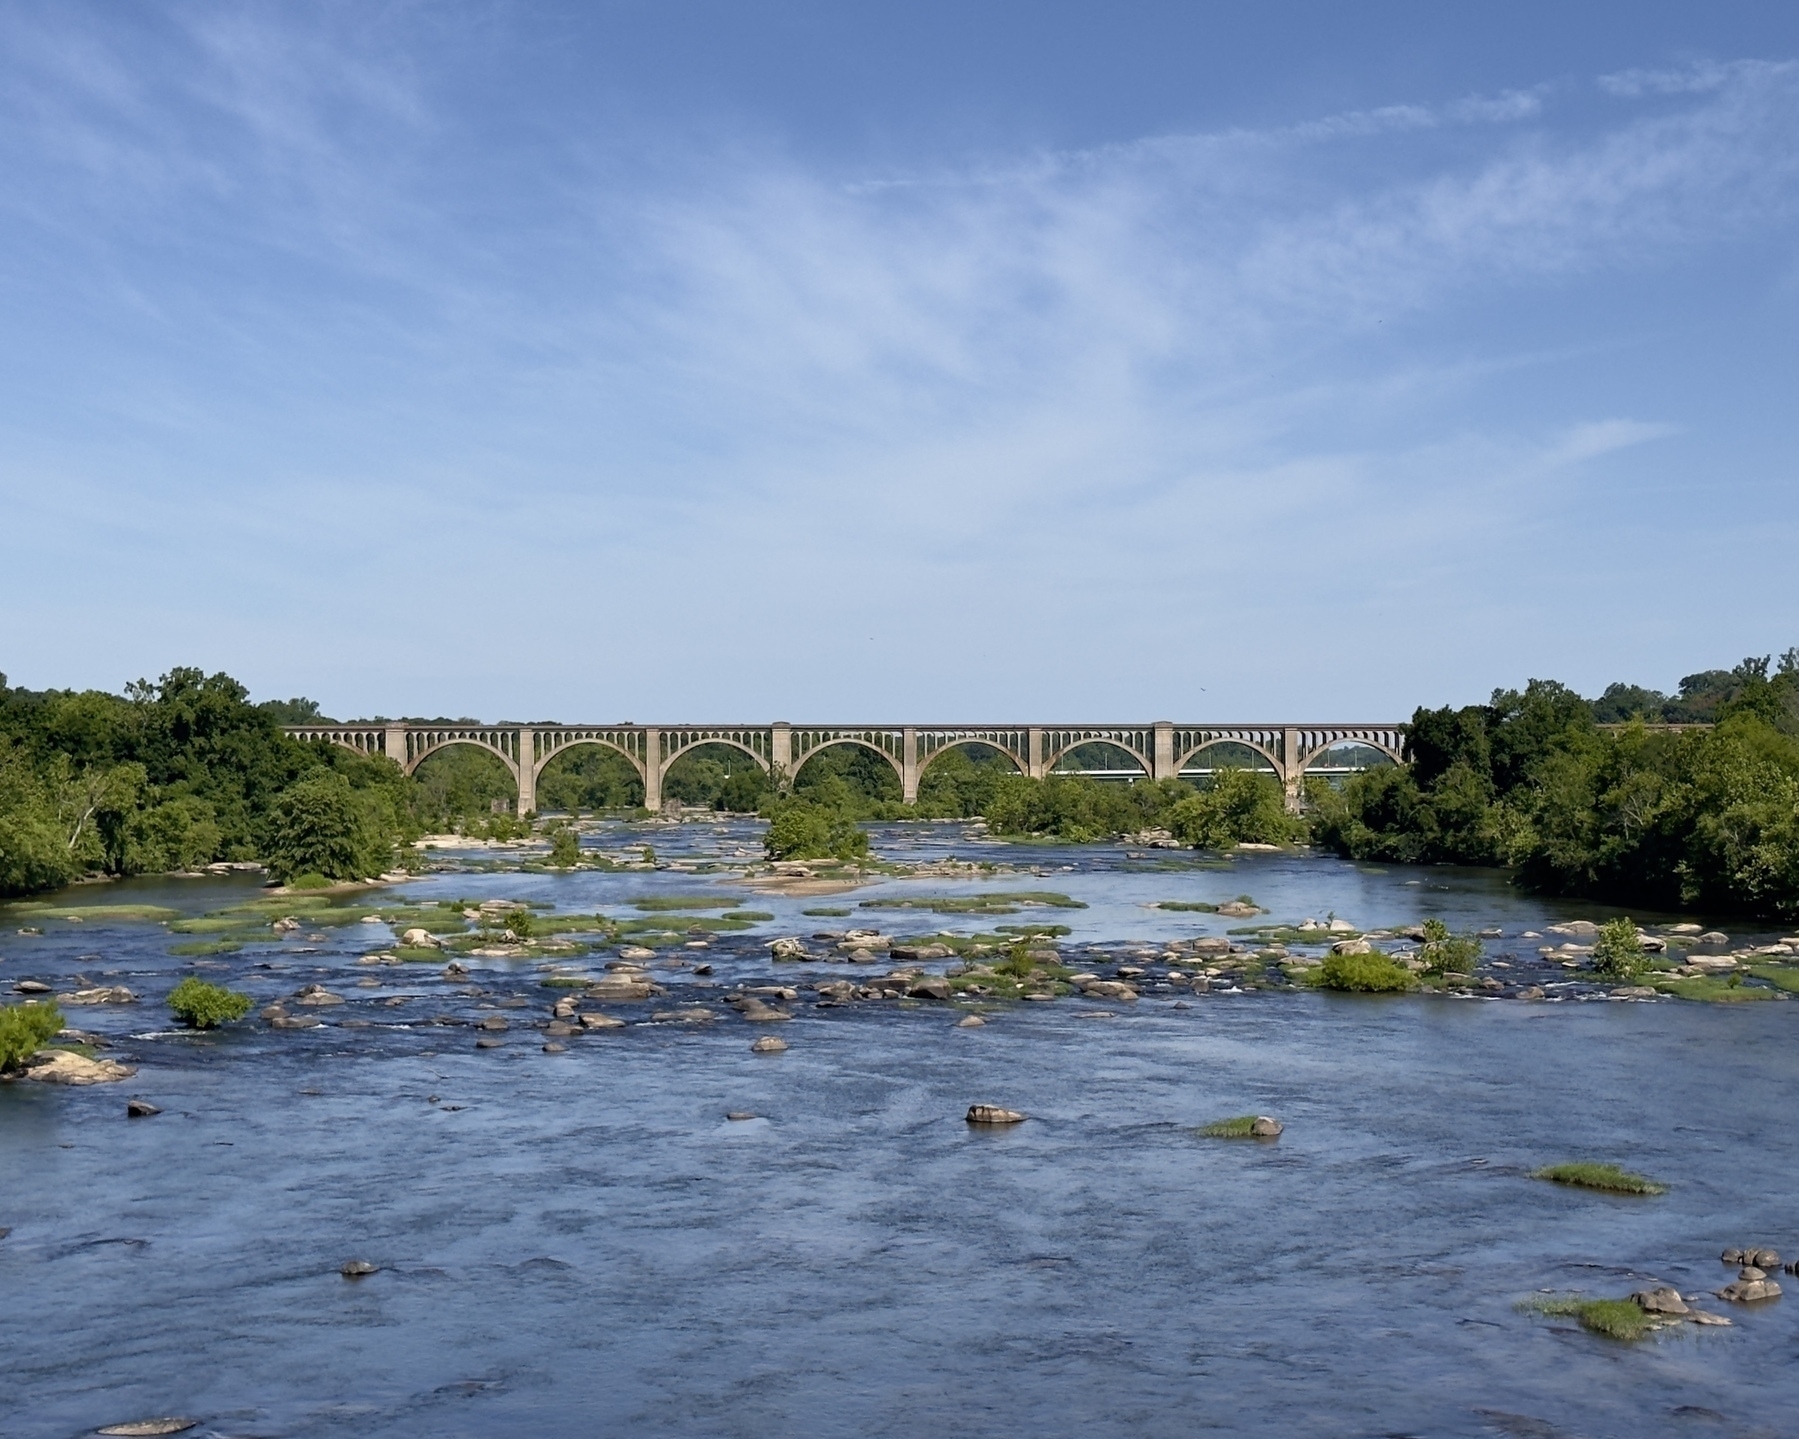 The CSX A-Line Bridge with concrete arches crossing the James River, viewed from the Nickel Bridge in Richmond, VA